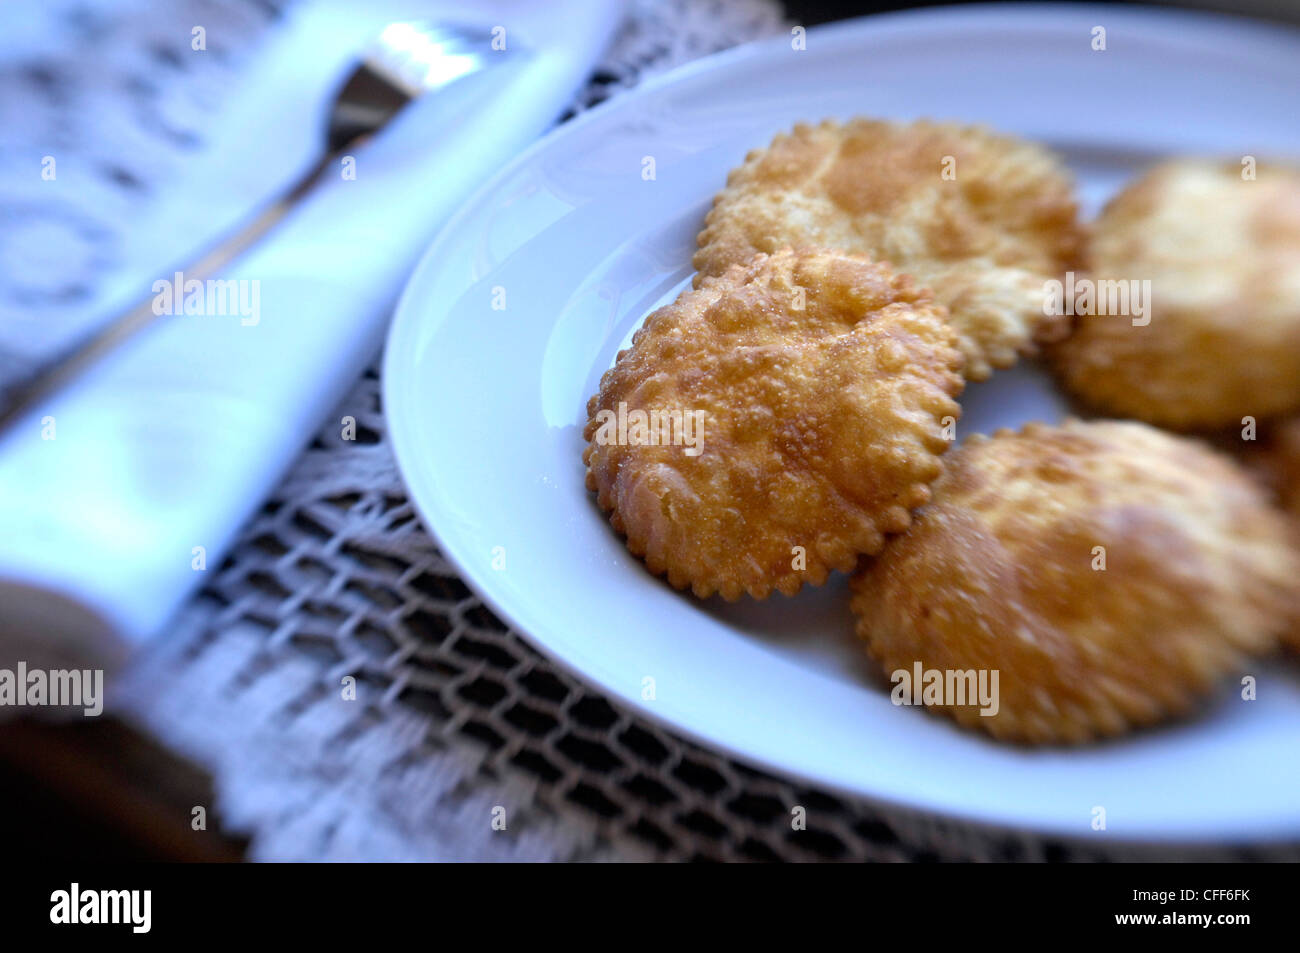 Pasties on a plate in a restaurant, Brunico, Val Pusteria, Alto Adige, South Tyrol, Italy, Europe Stock Photo